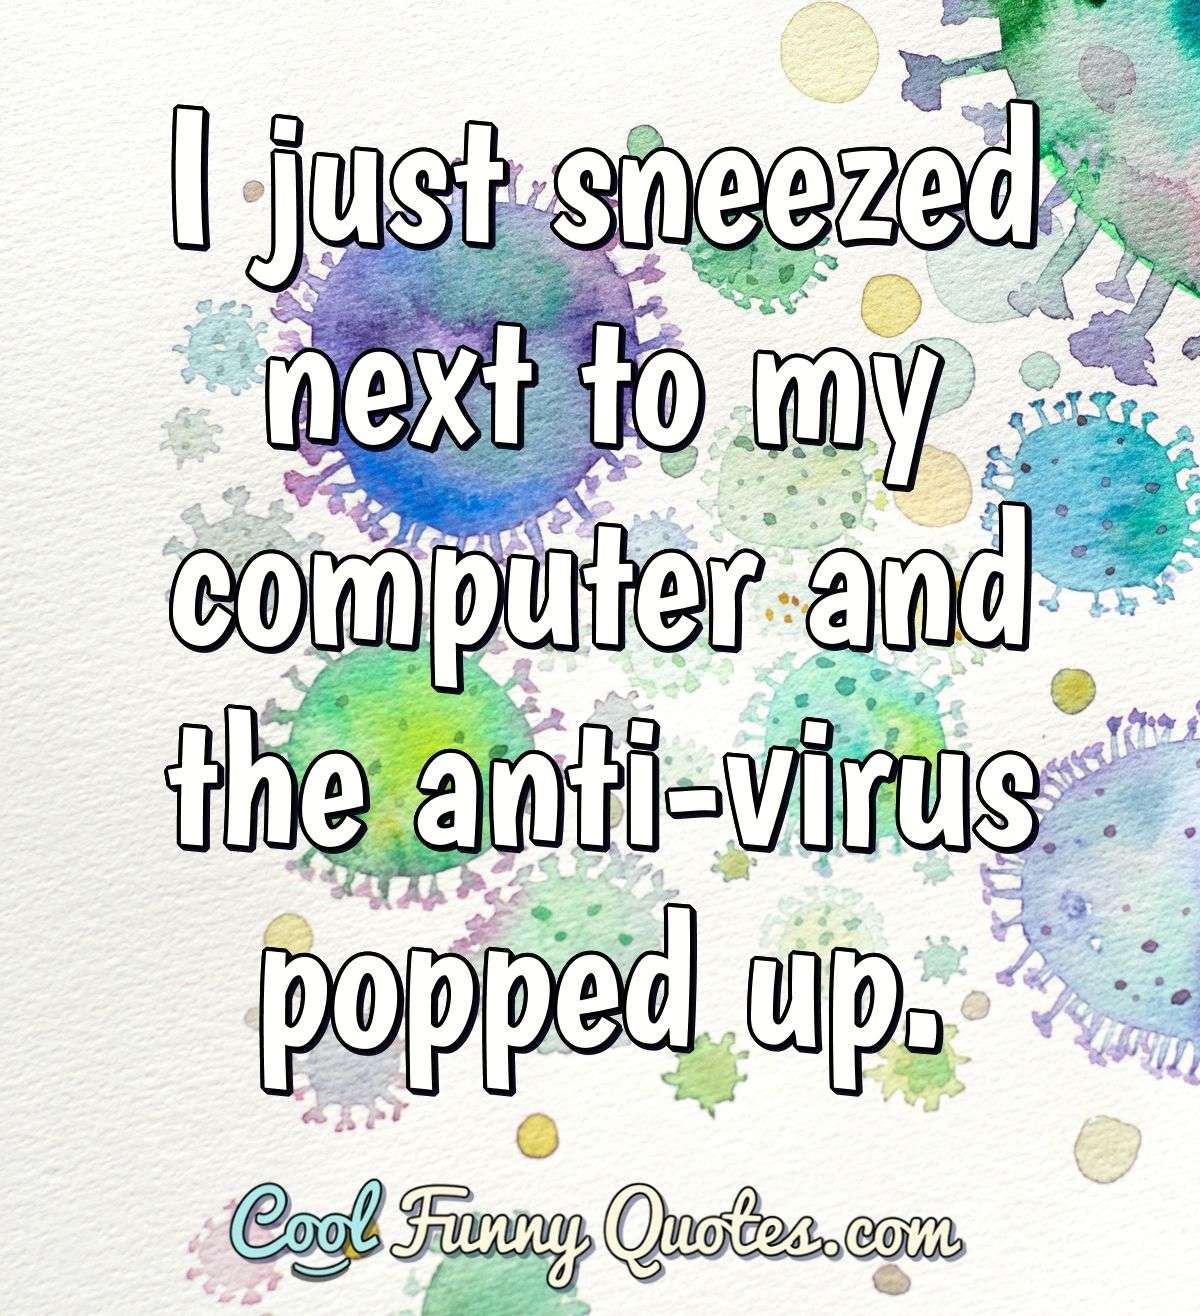 I just sneezed next to my computer and the anti-virus popped up. - Anonymous